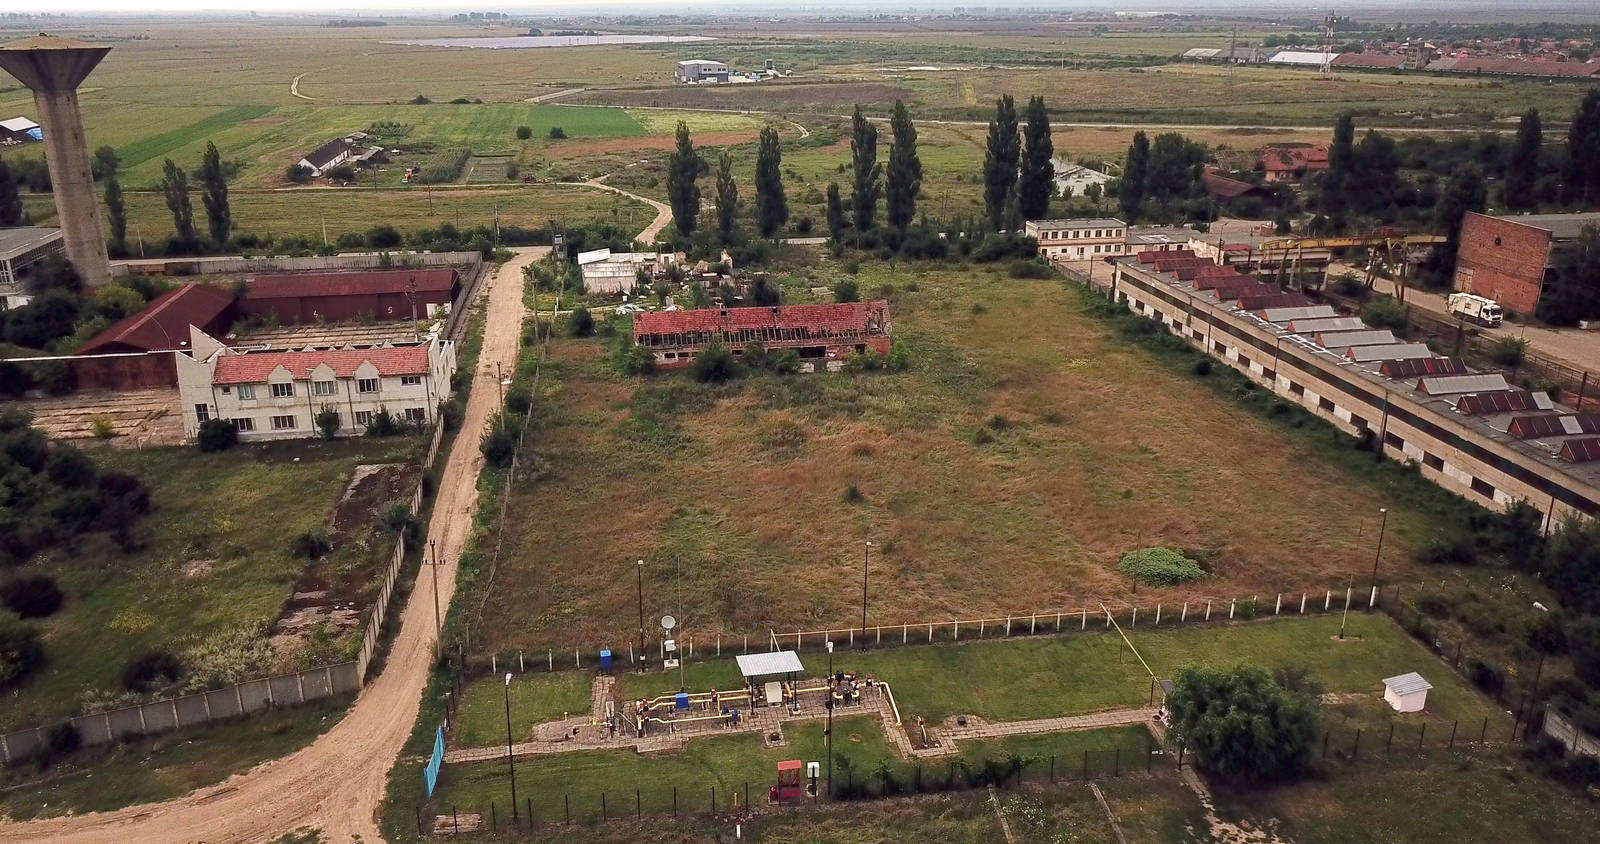 Some of the land Bánki bought in Salonta. (Photo: Rise Project Romania)